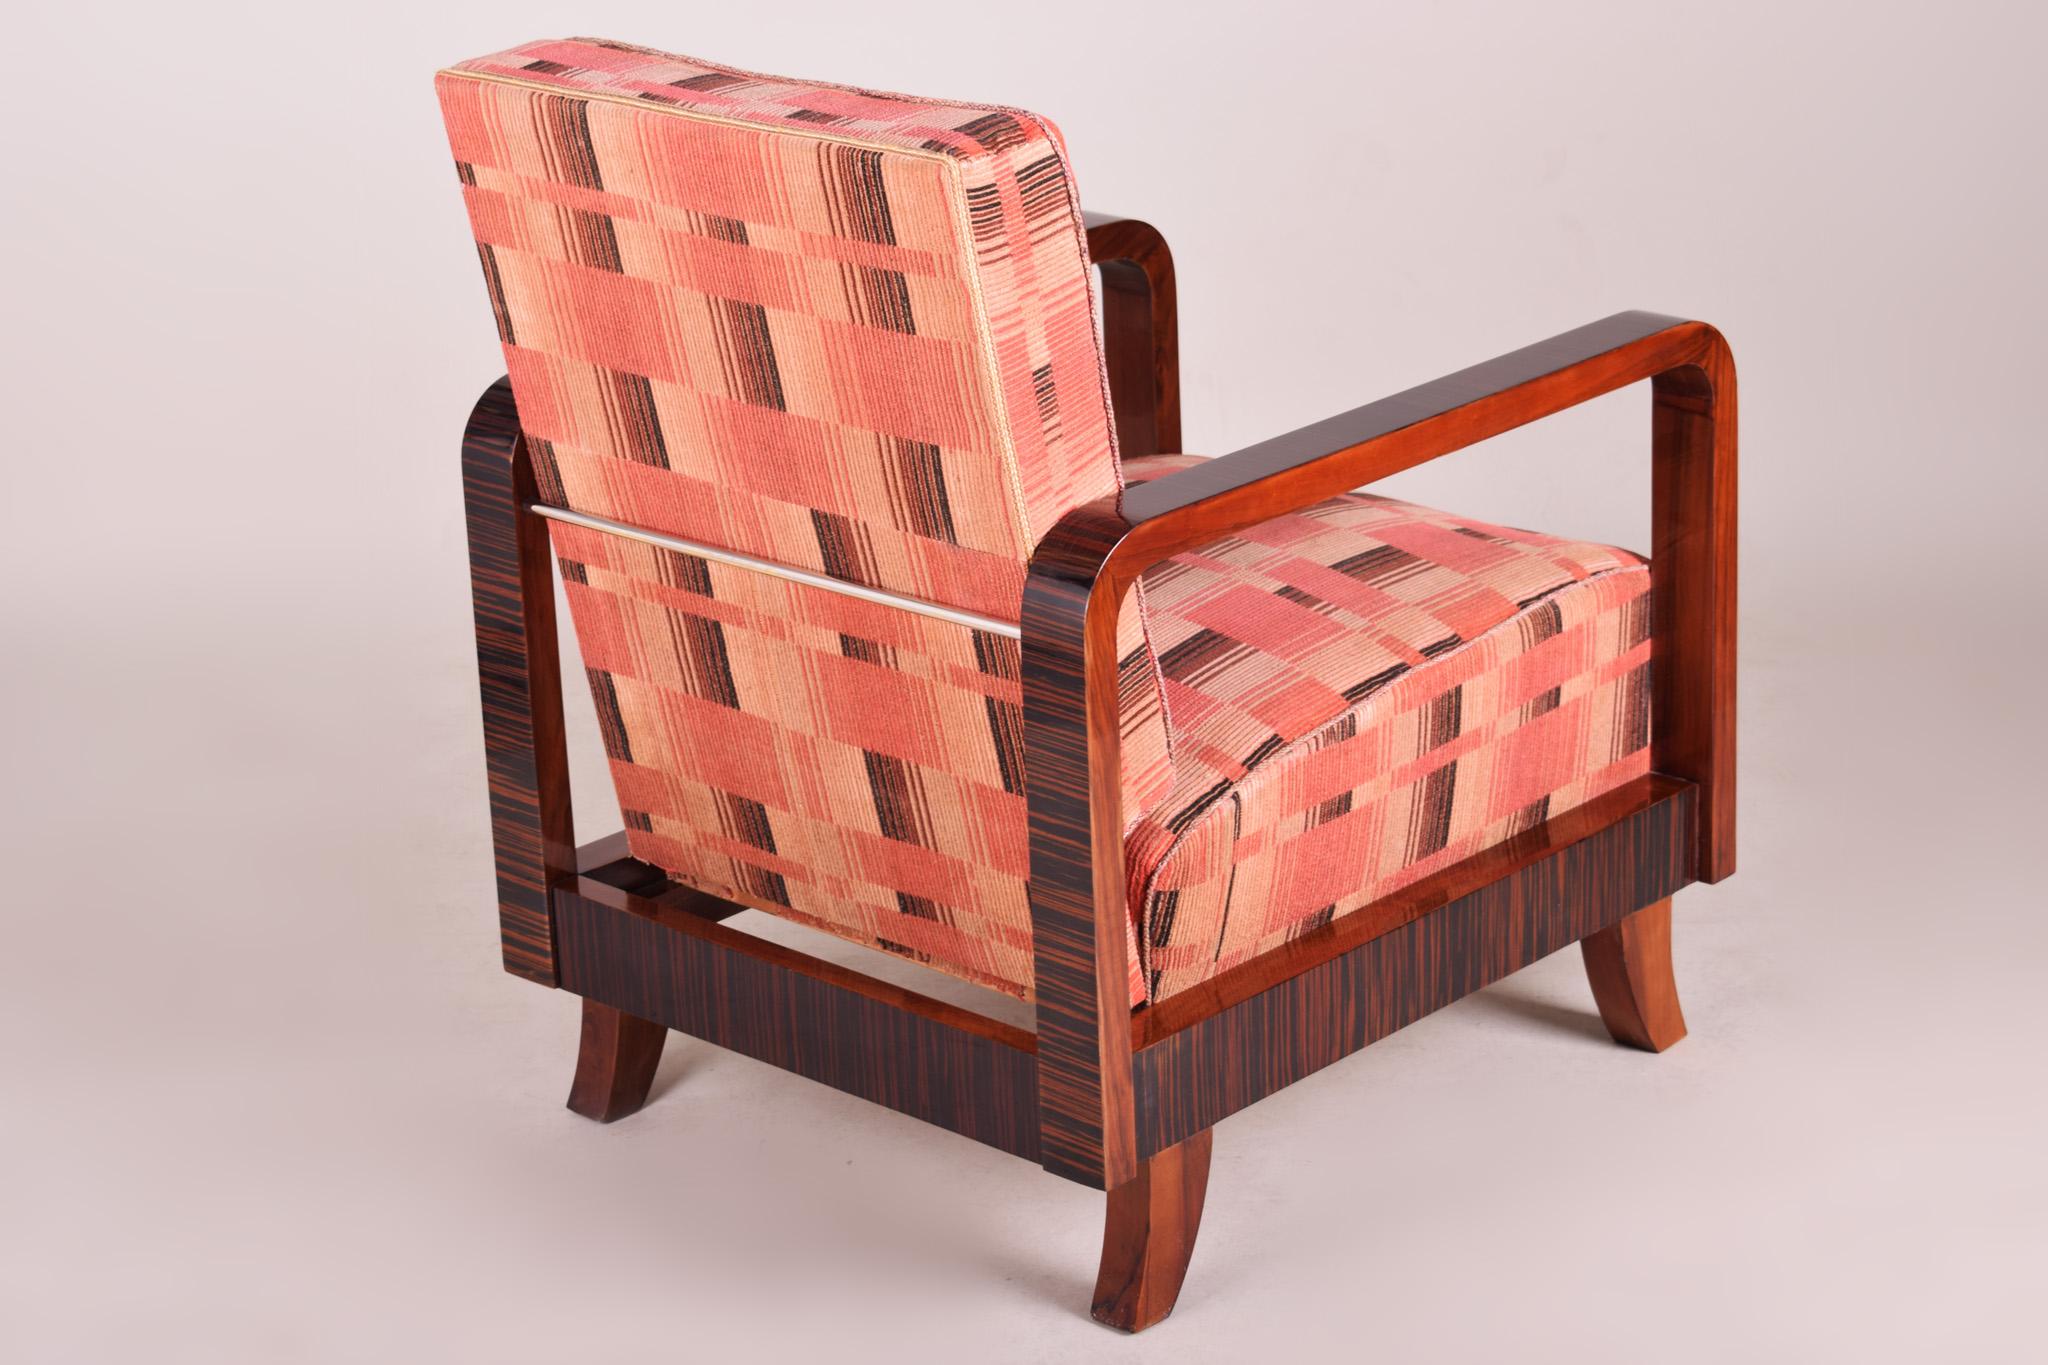 Pink Art Deco Armchair, Made in 1930s Czechia and Restored, Original Fabric For Sale 10